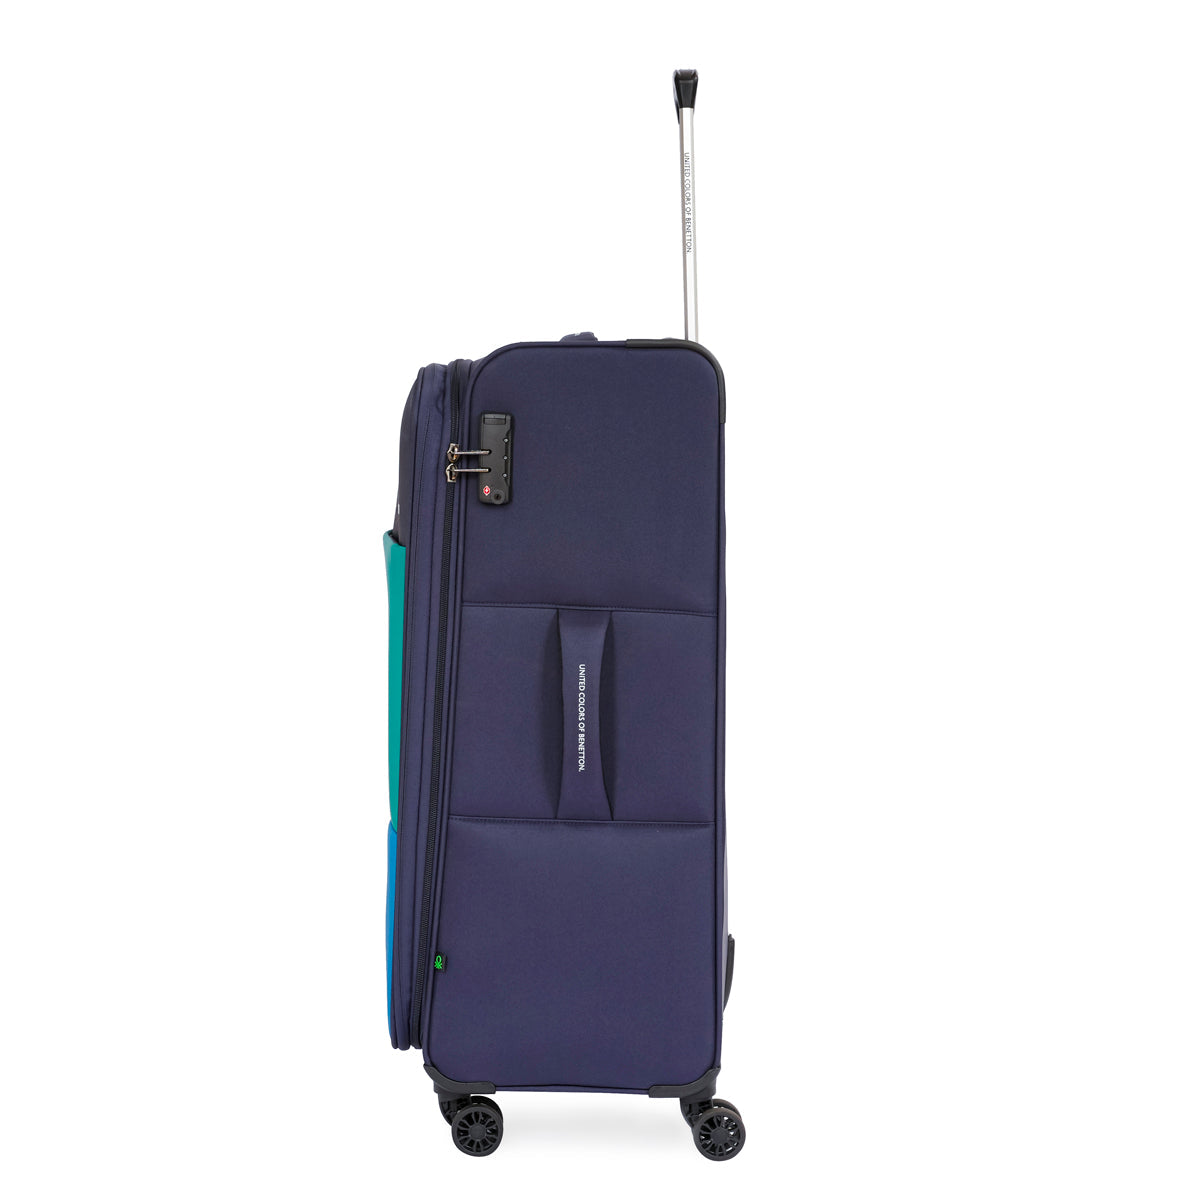 United Colors of Benetton Archimedes Soft Luggage Green Cargo